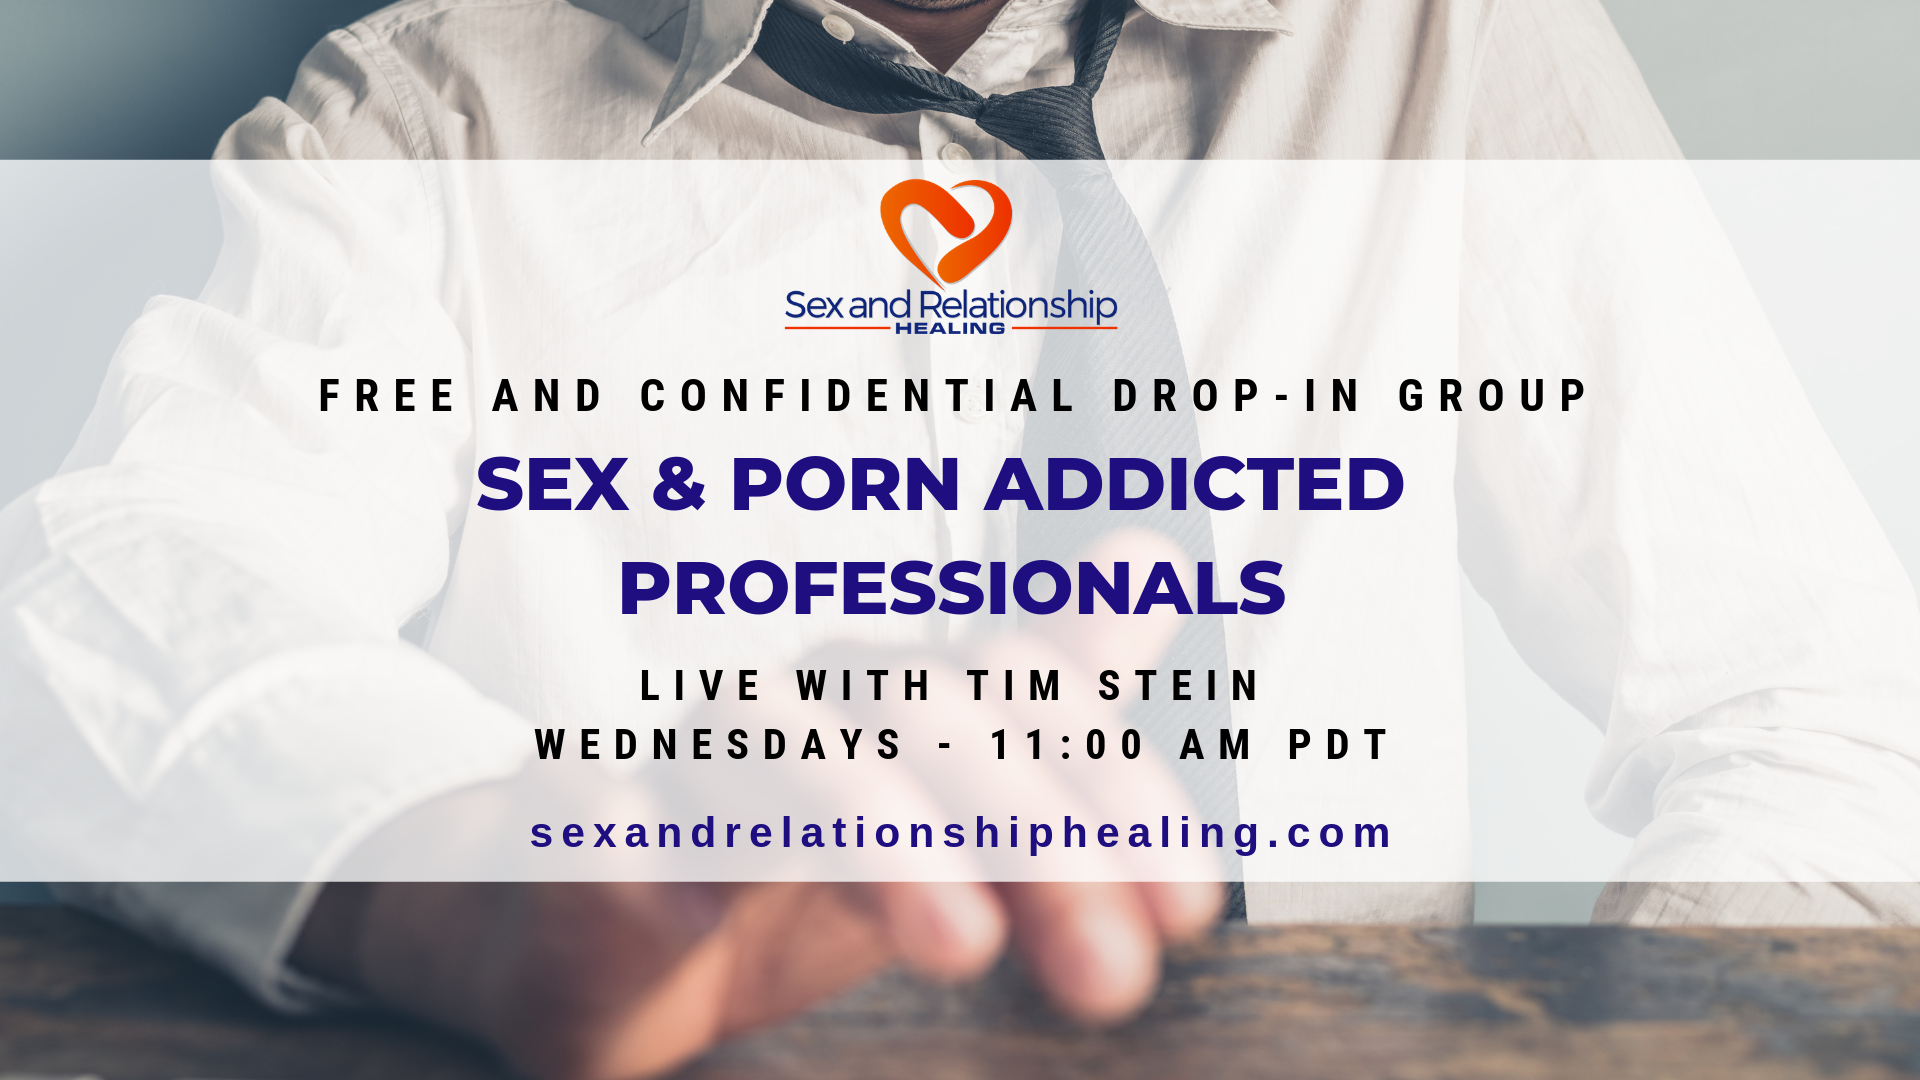 1920px x 1080px - Professionals Drop-in Group - Sex and Relationship Healing